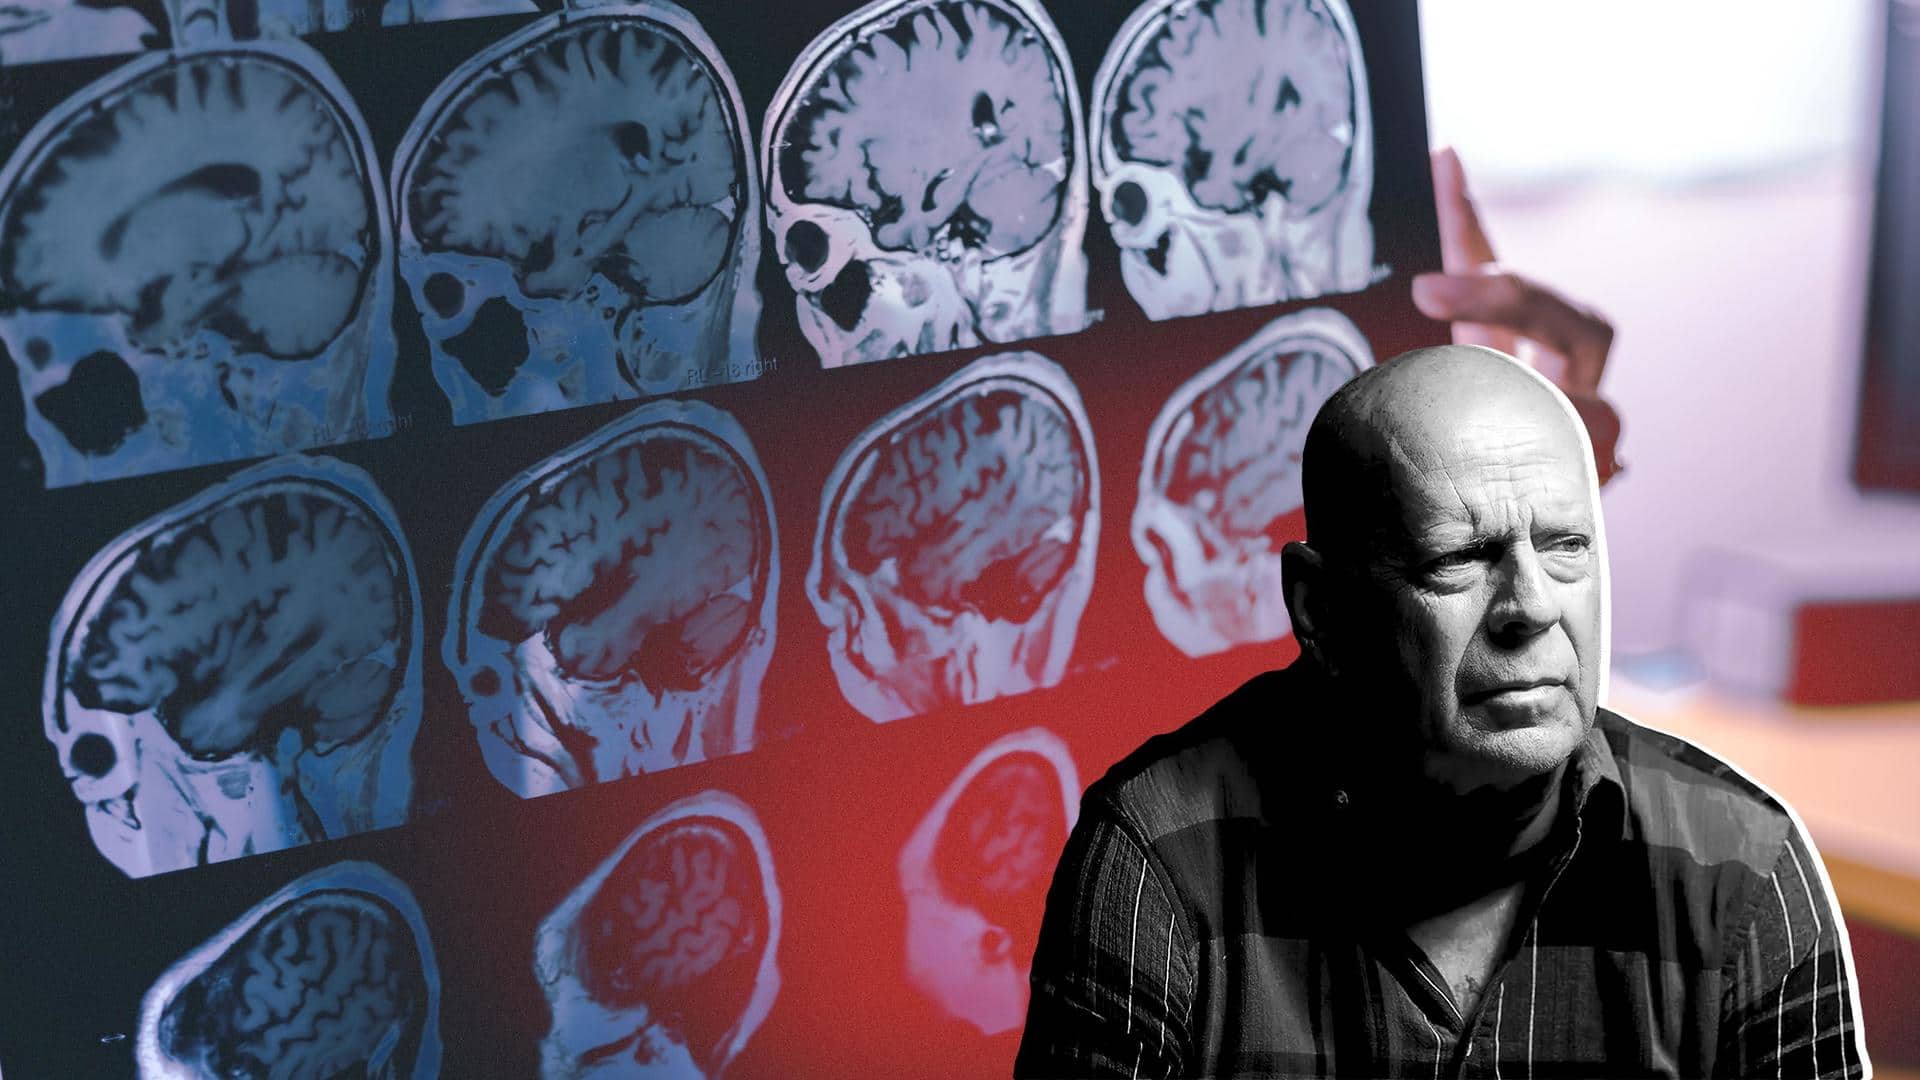 #NewsBytesExplainer: What's frontotemporal dementia? The disease Bruce Willis is battling